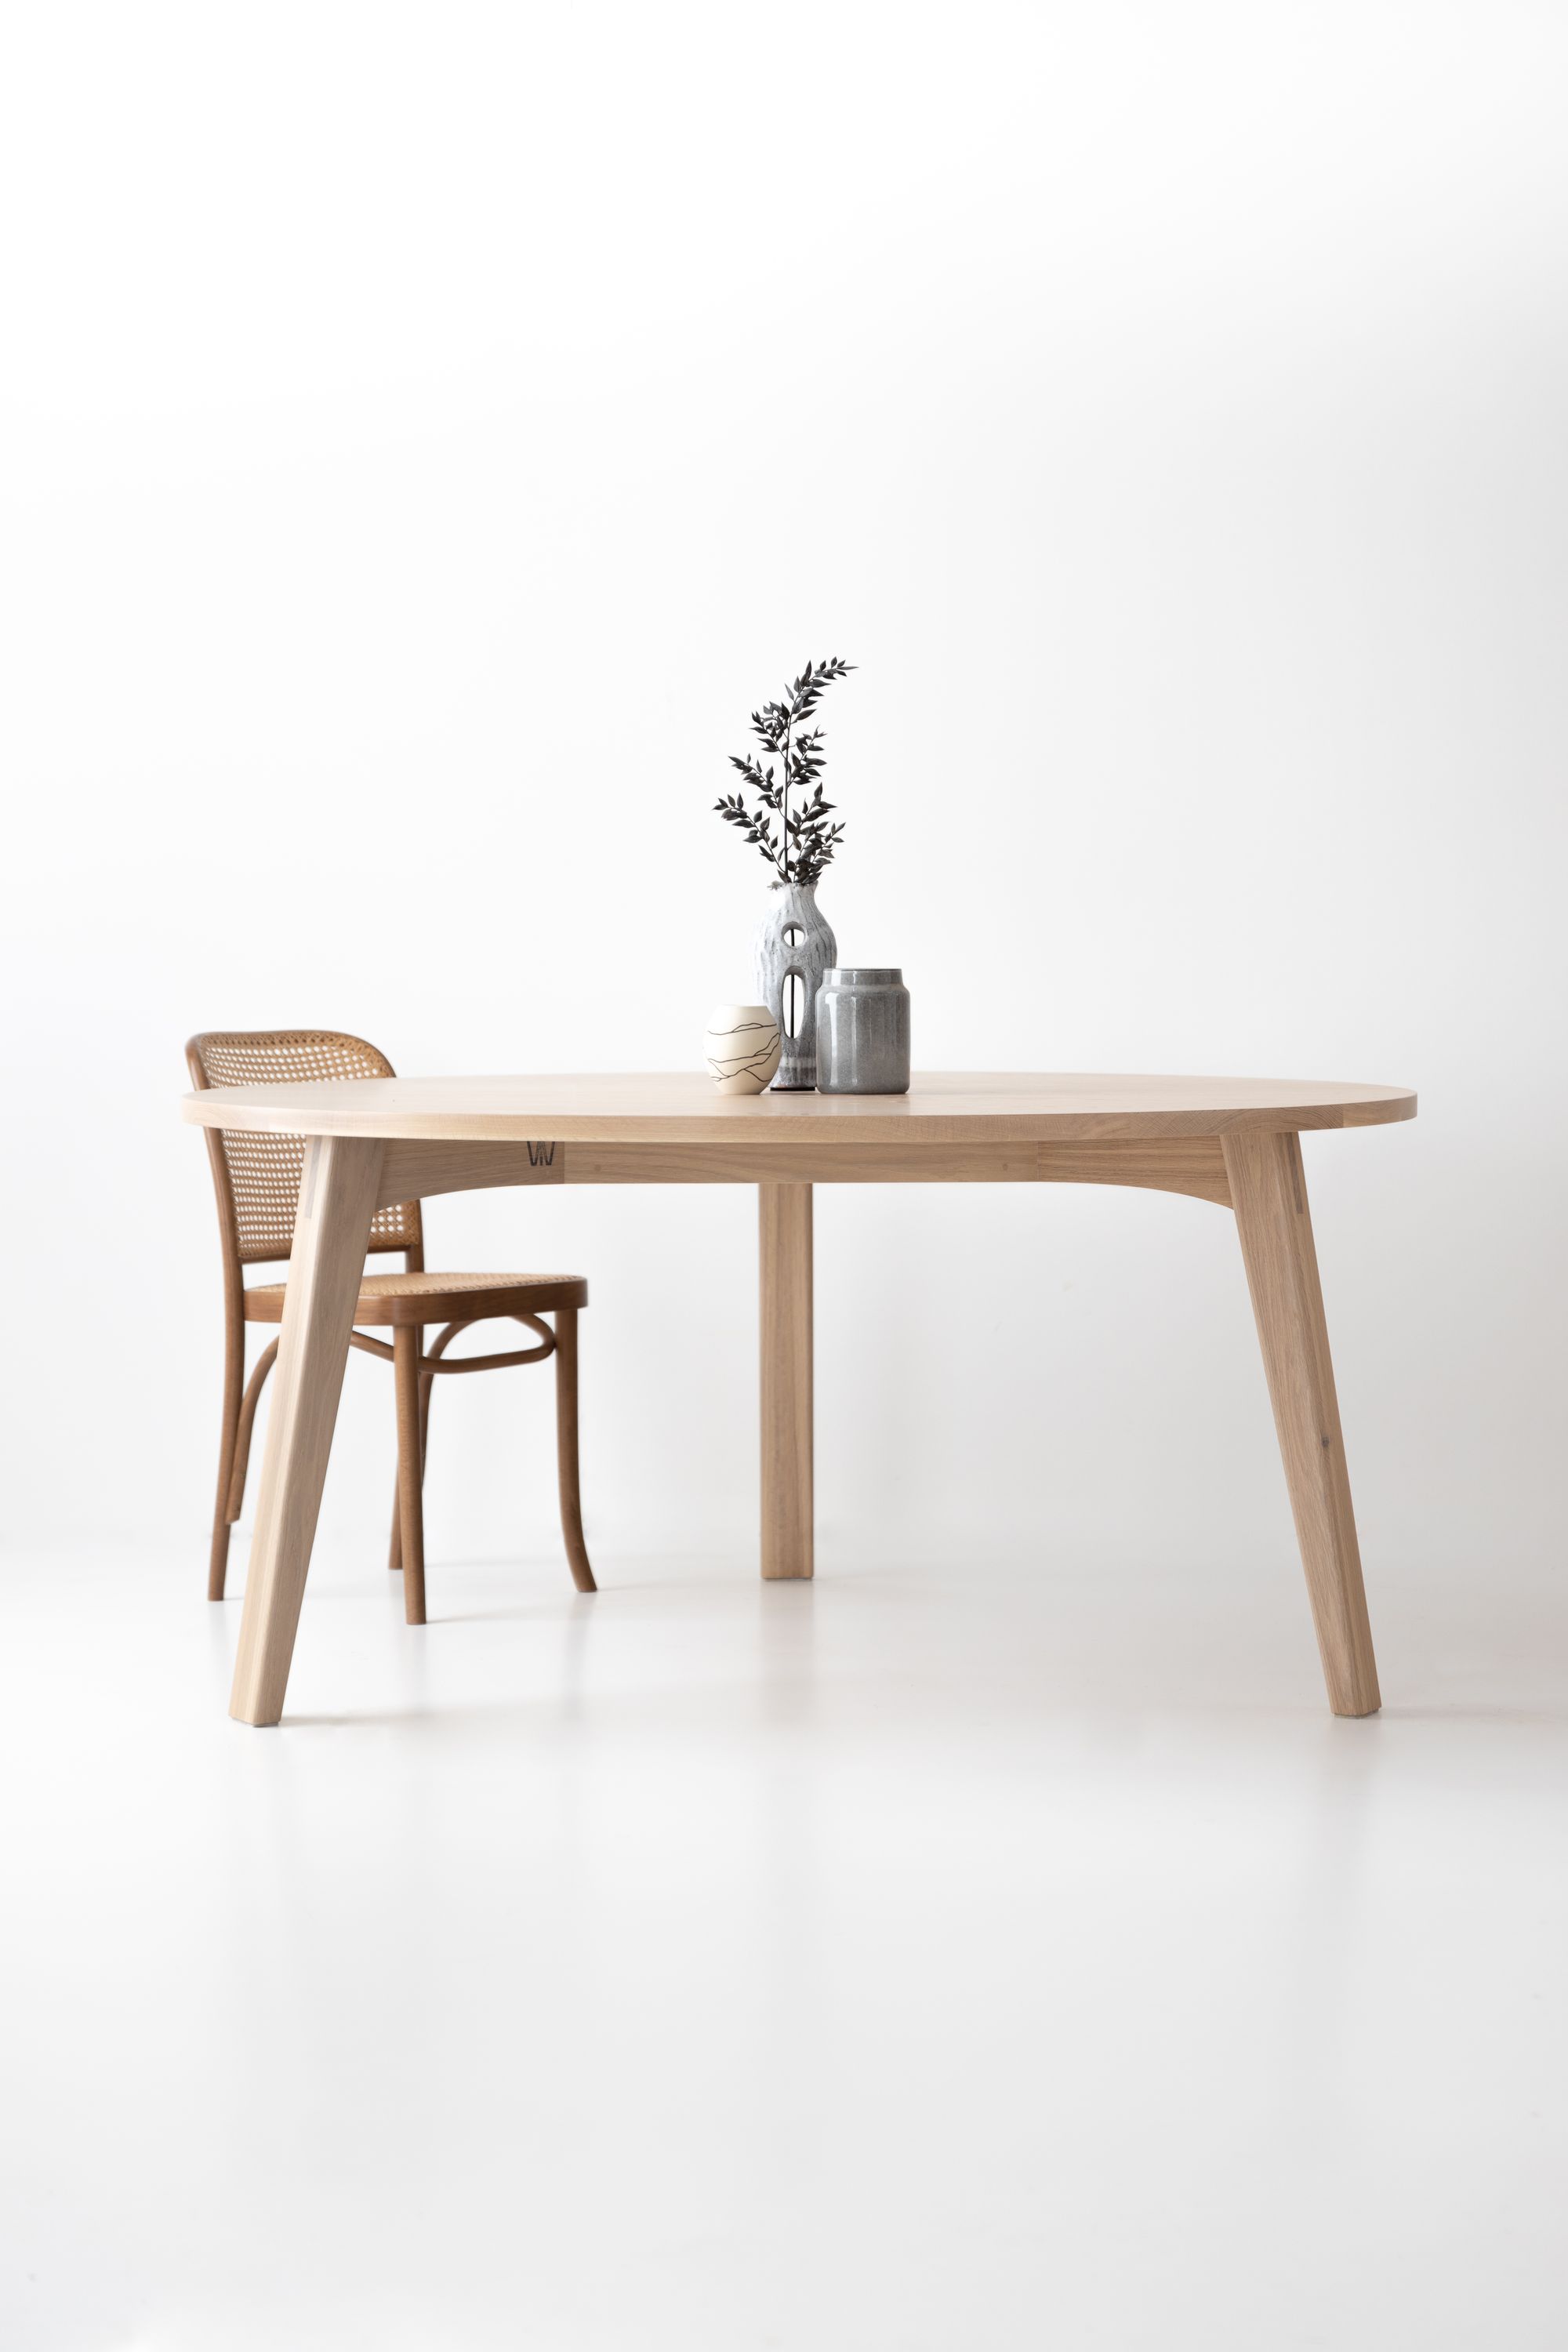 The table is adorned with a small vase holding a single branch with small leaves, alongside a grey pottery piece and a small cup with an abstract design. The white background provides a stark contrast that emphasizes the simplicity and clean lines of the furniture.